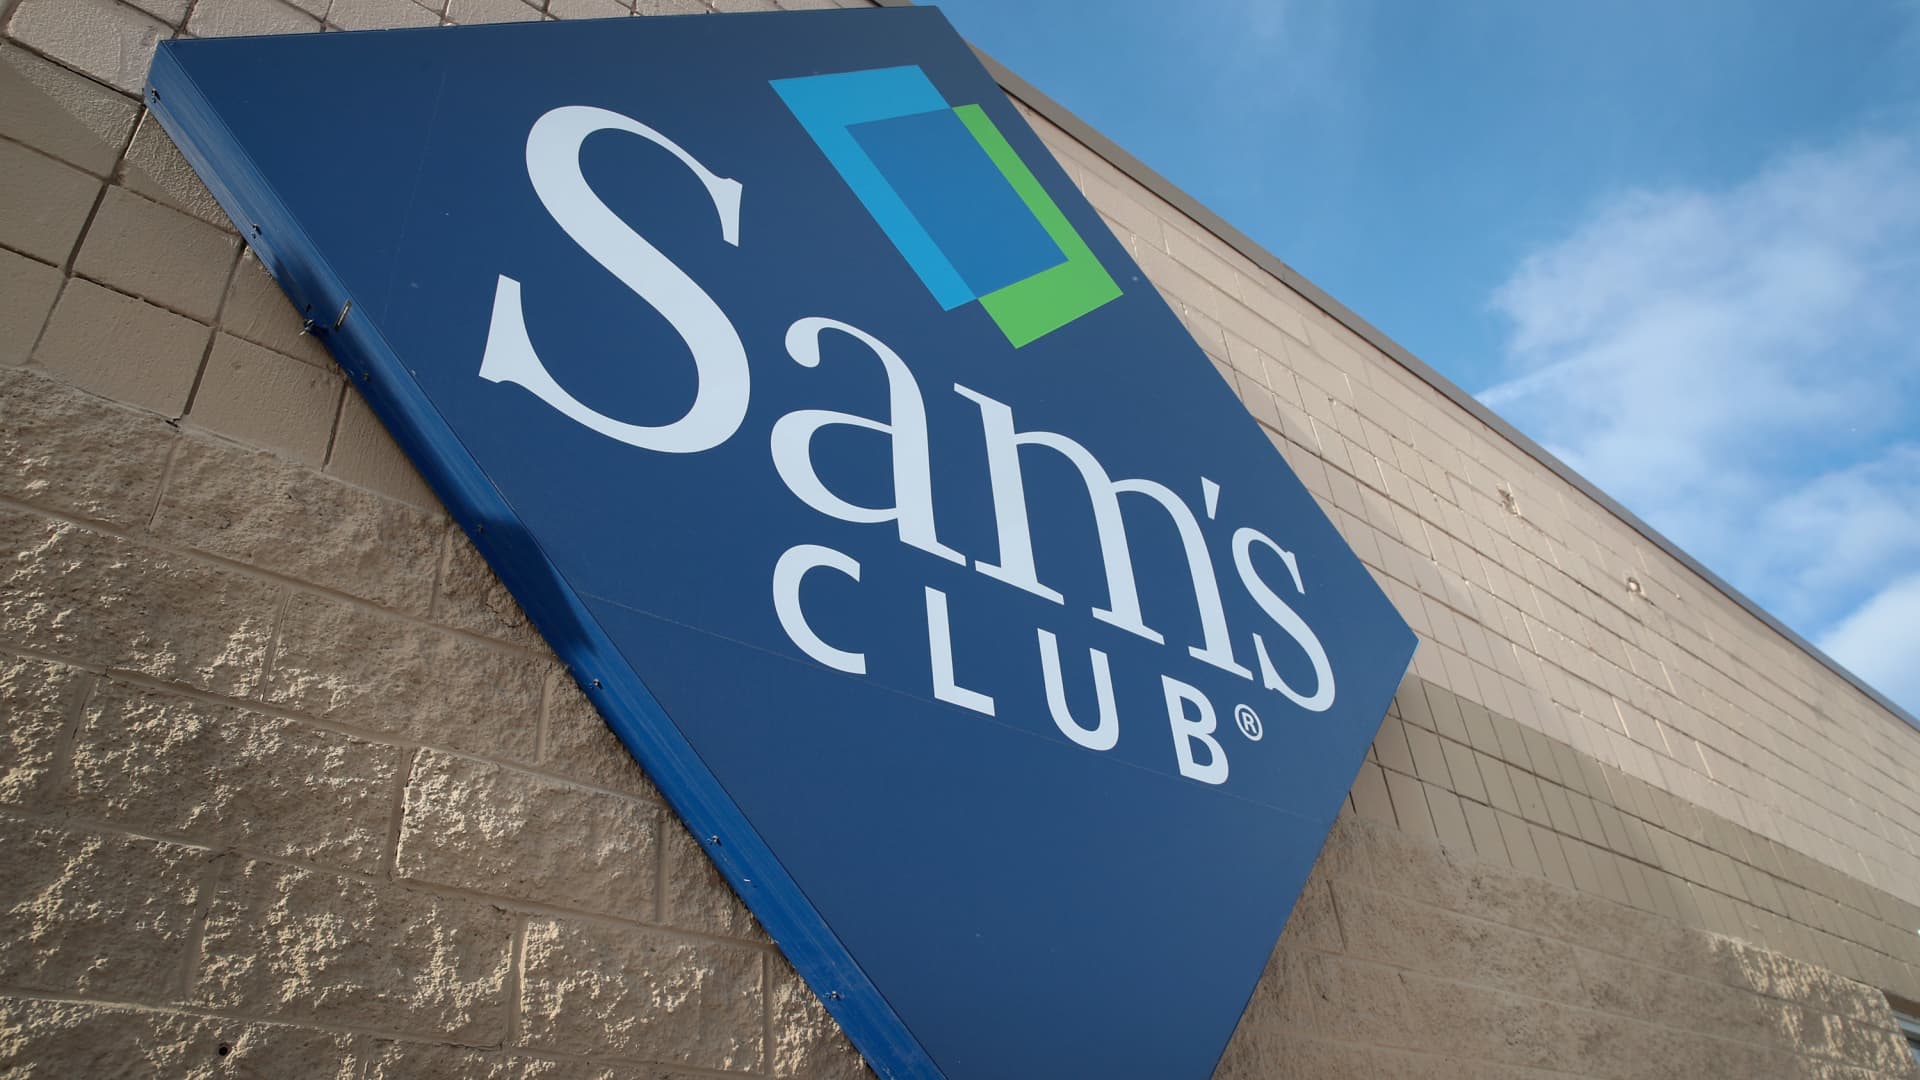 Walmart-owned Sam’s Club raises annual membership fee for the first time in nine years – CNBC